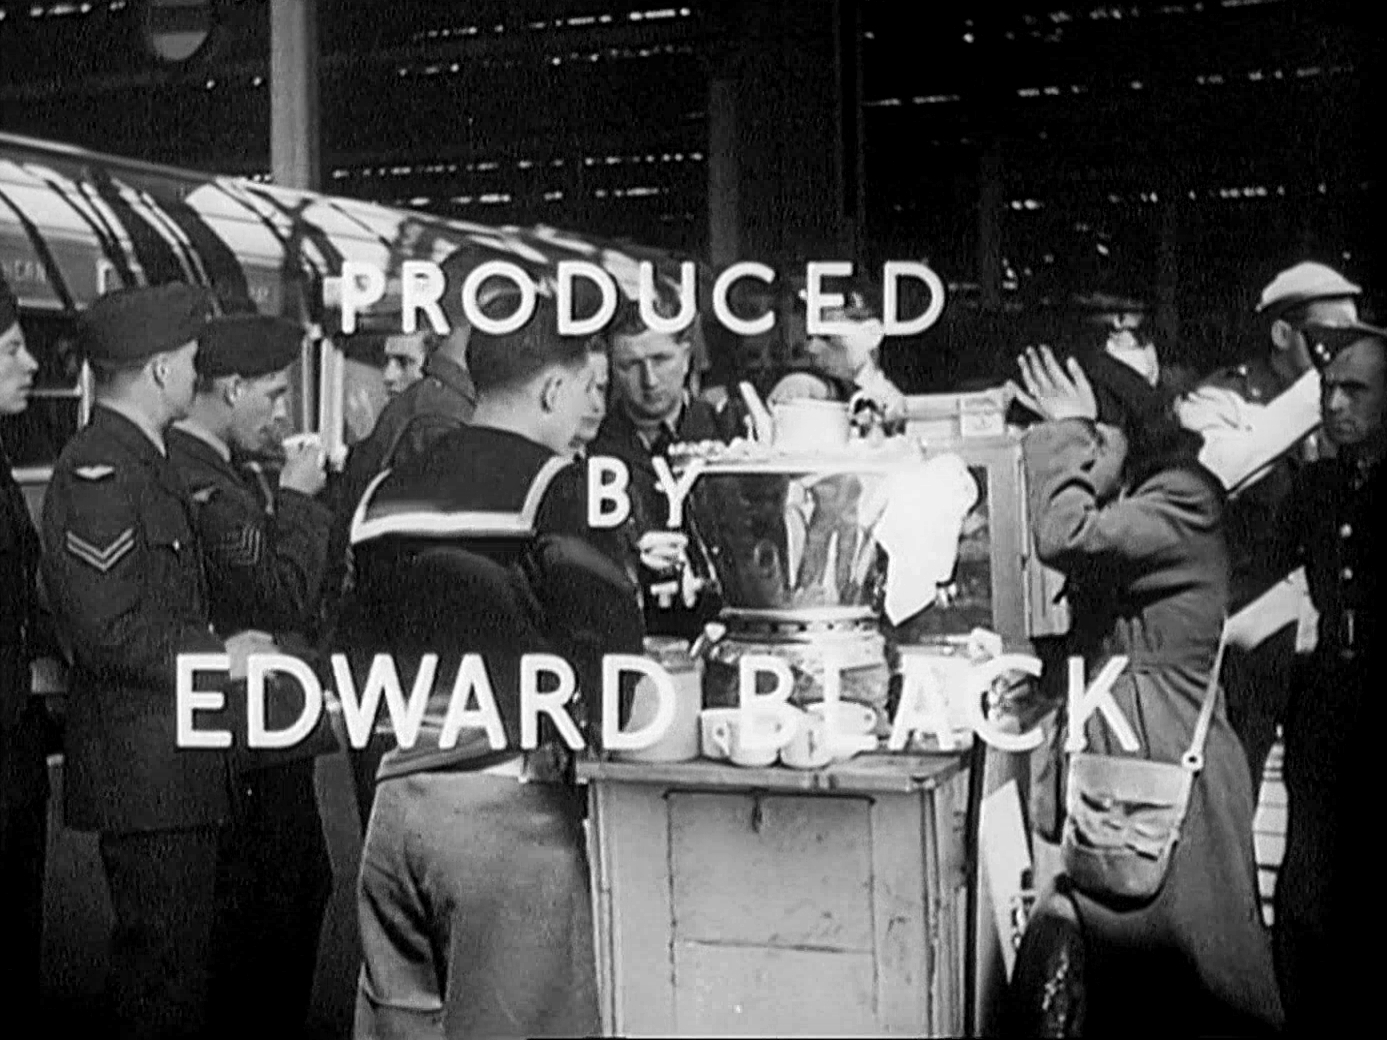 Main title from Waterloo Road (1945) (12). Produced by Edward Black